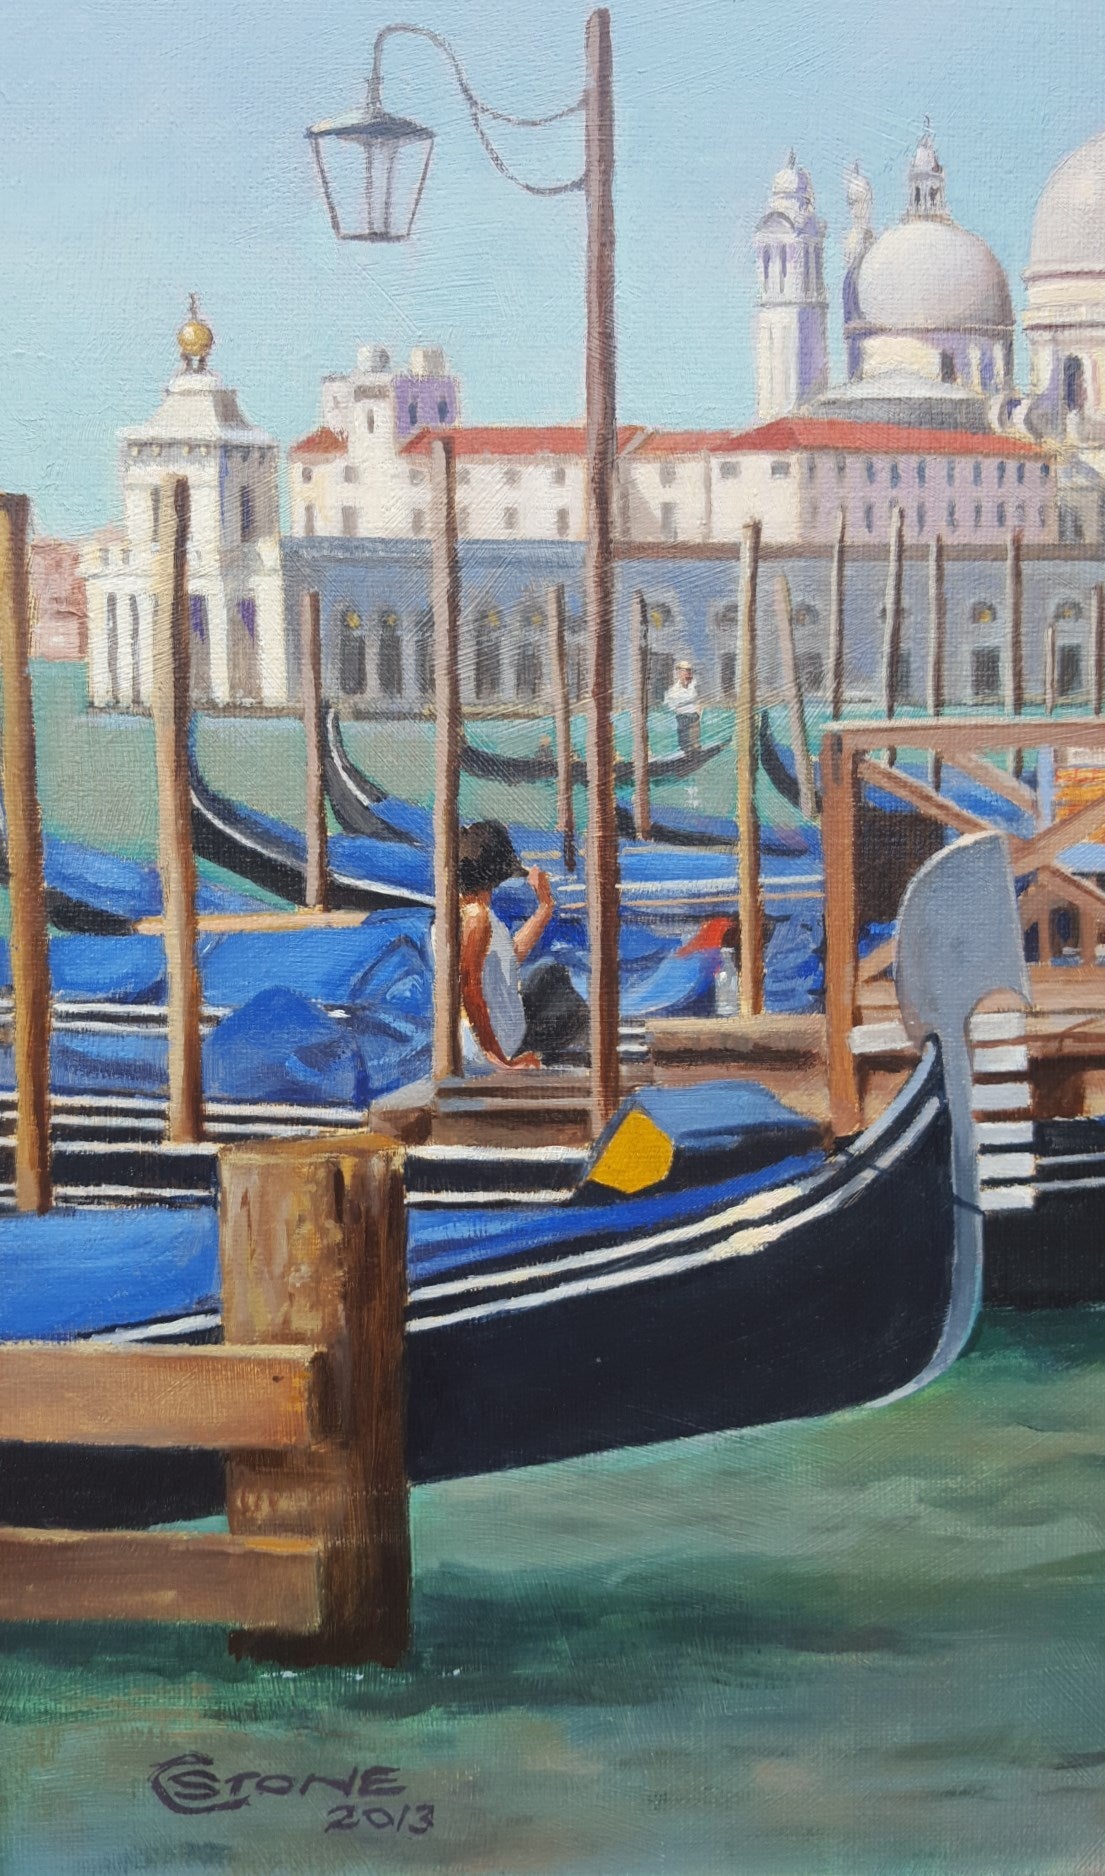 Entry To The Grand Canal, Italy - Blue Landscape Painting by Christopher Stone